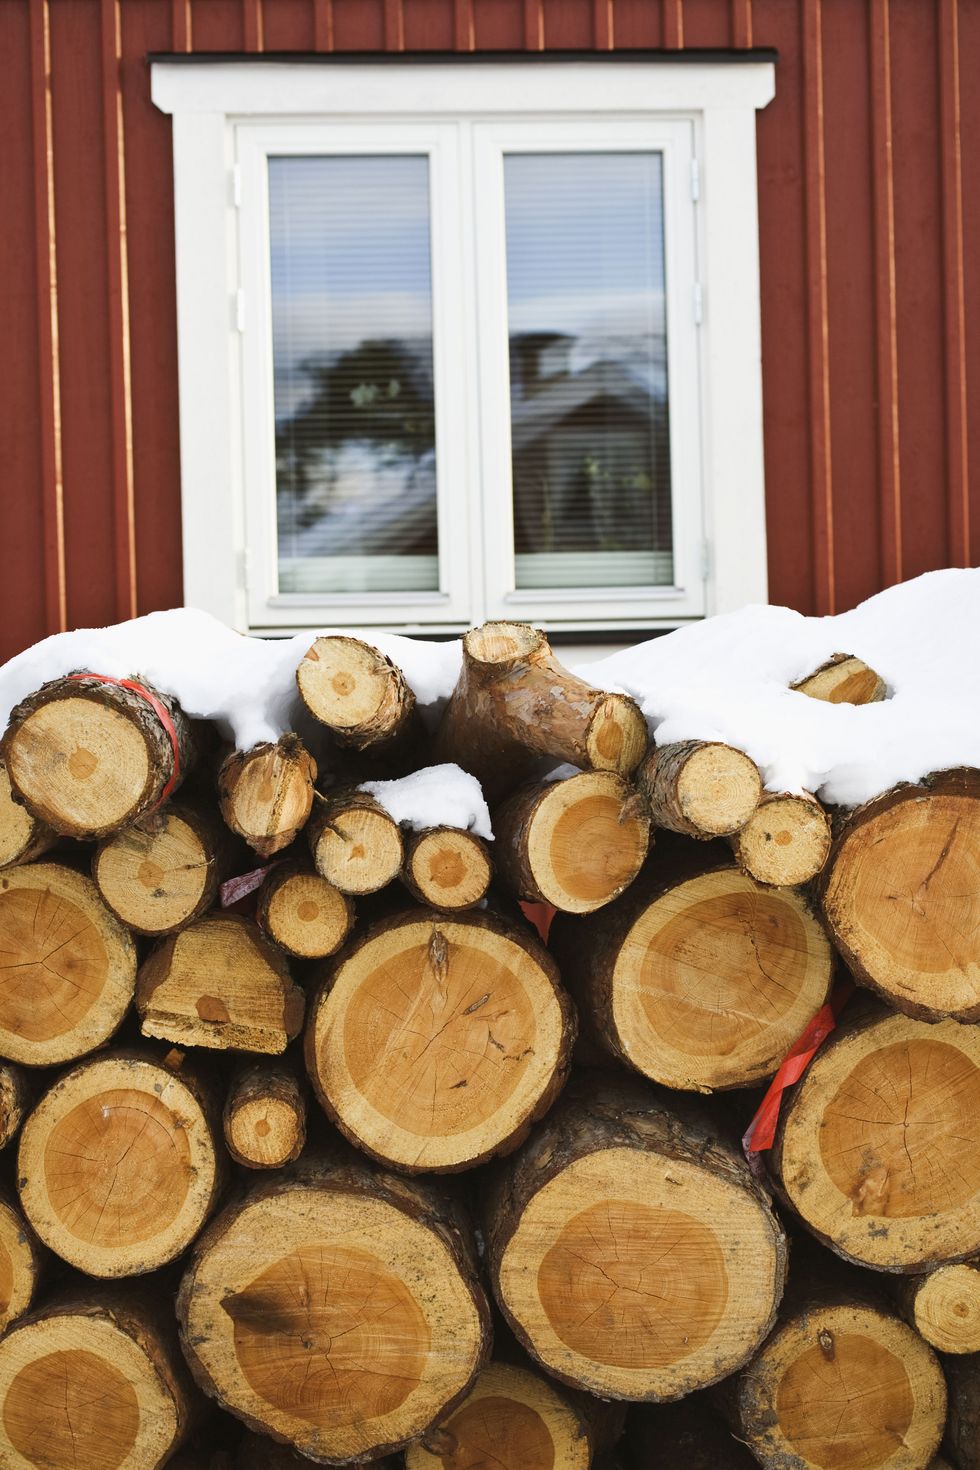 <p>It may be convenient, but stacking firewood against the exterior of your home is a no-go. Both logs and plants can form a literal bridge for termites and critters looking to get inside, Bell says. Maintain&nbsp;at least a 6-inch gap between siding and foliage, and store&nbsp;nothing against the walls.&nbsp;</p>